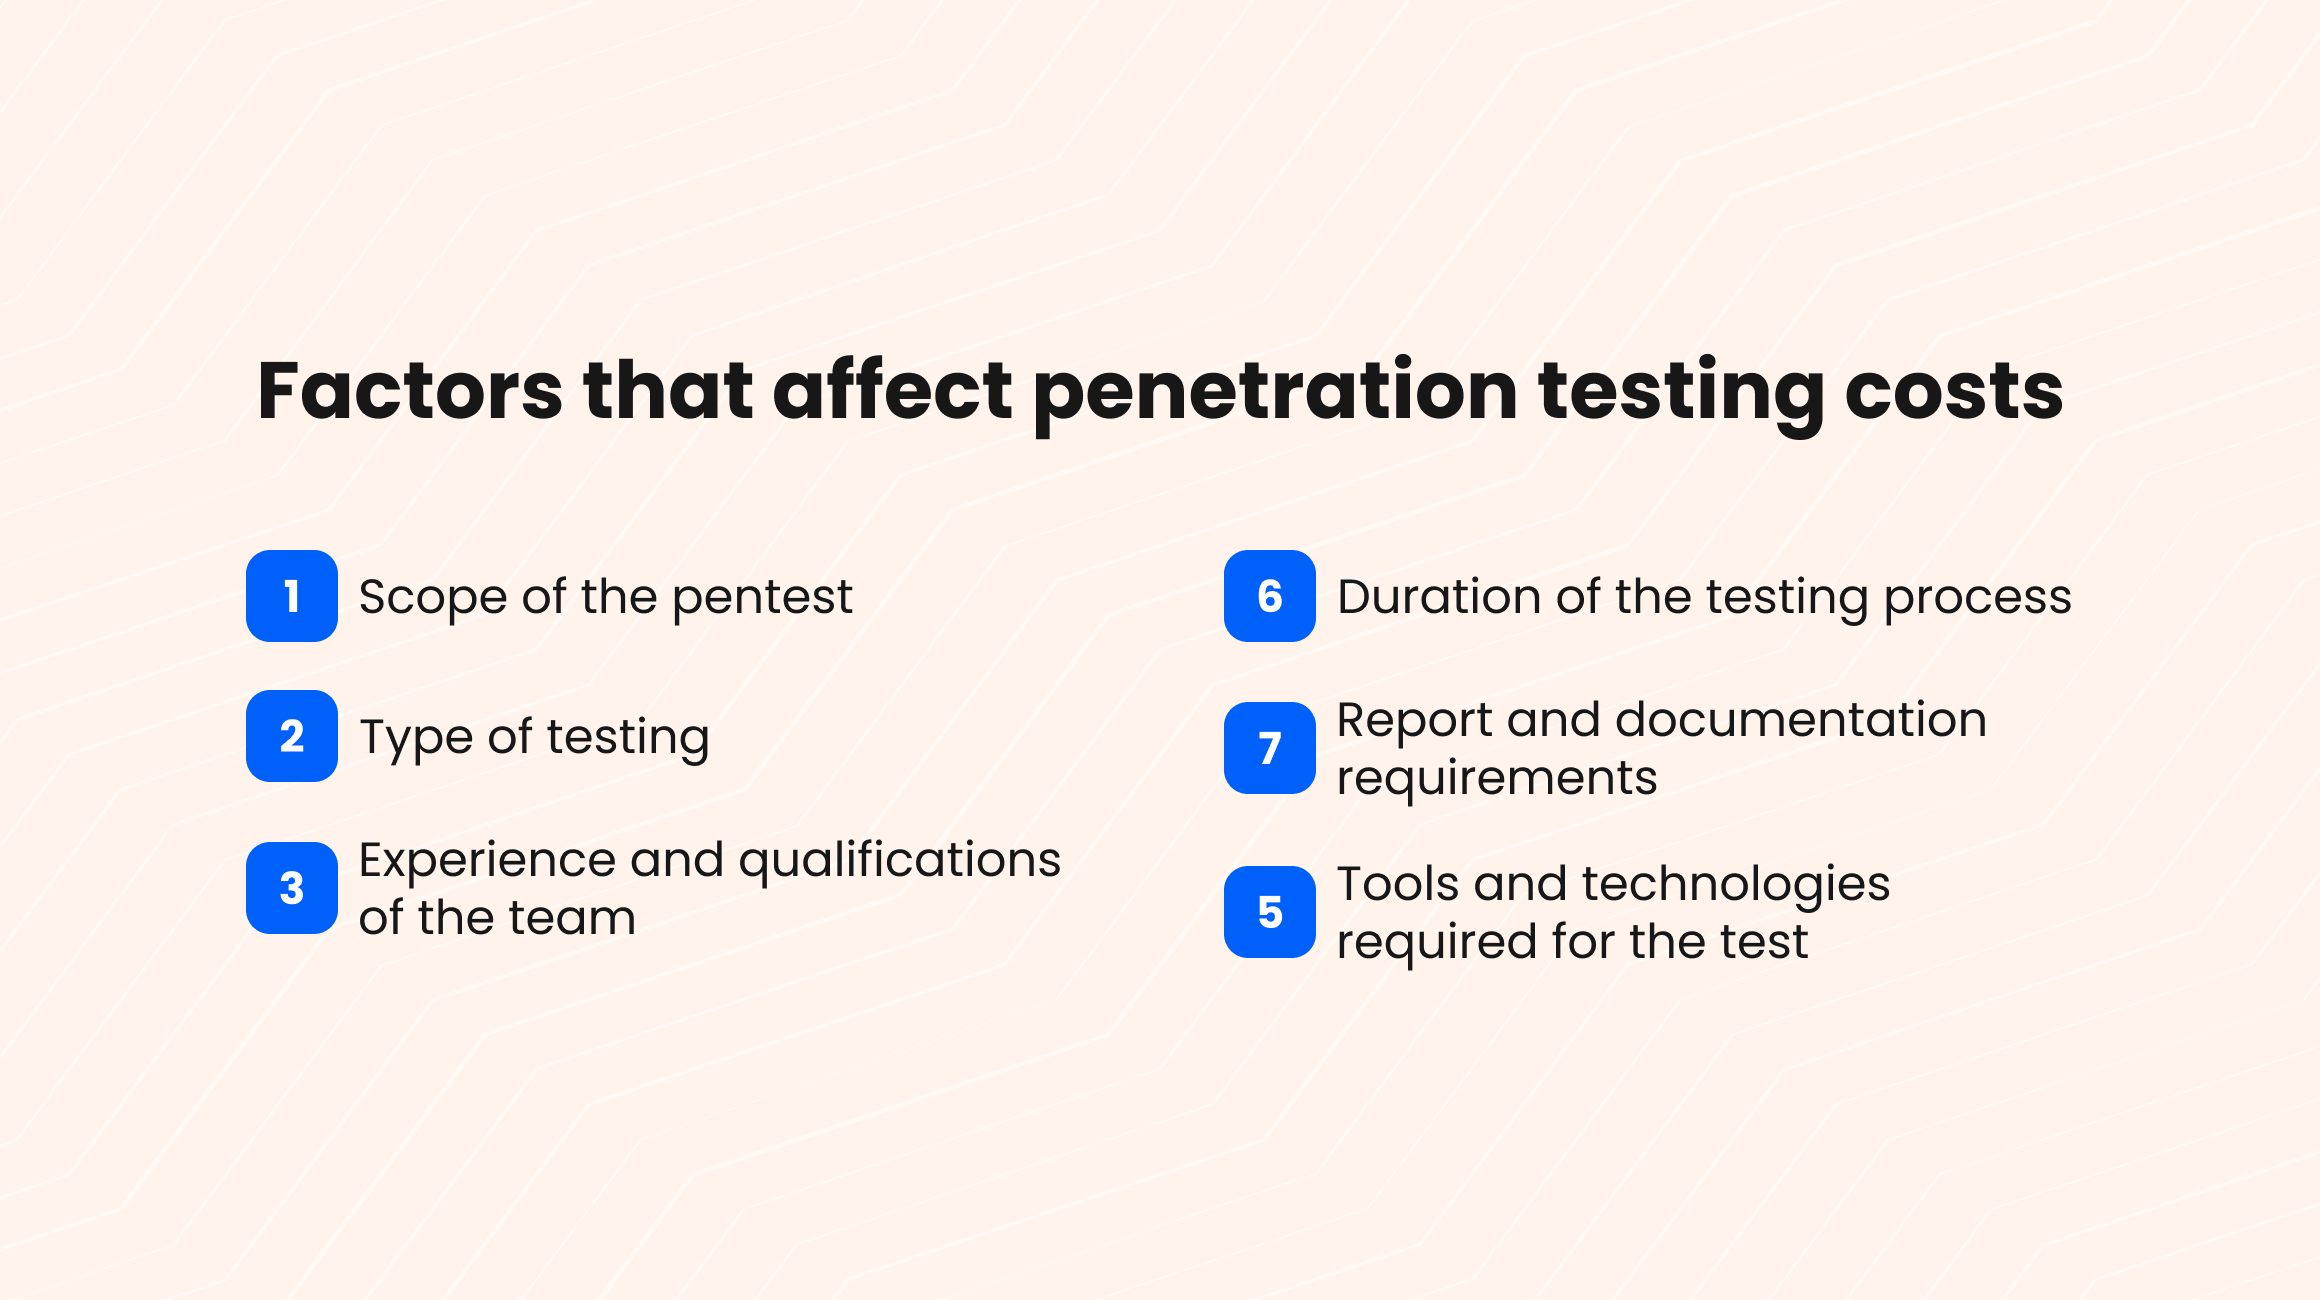 Factors That Affect Cost of Penetration Testing